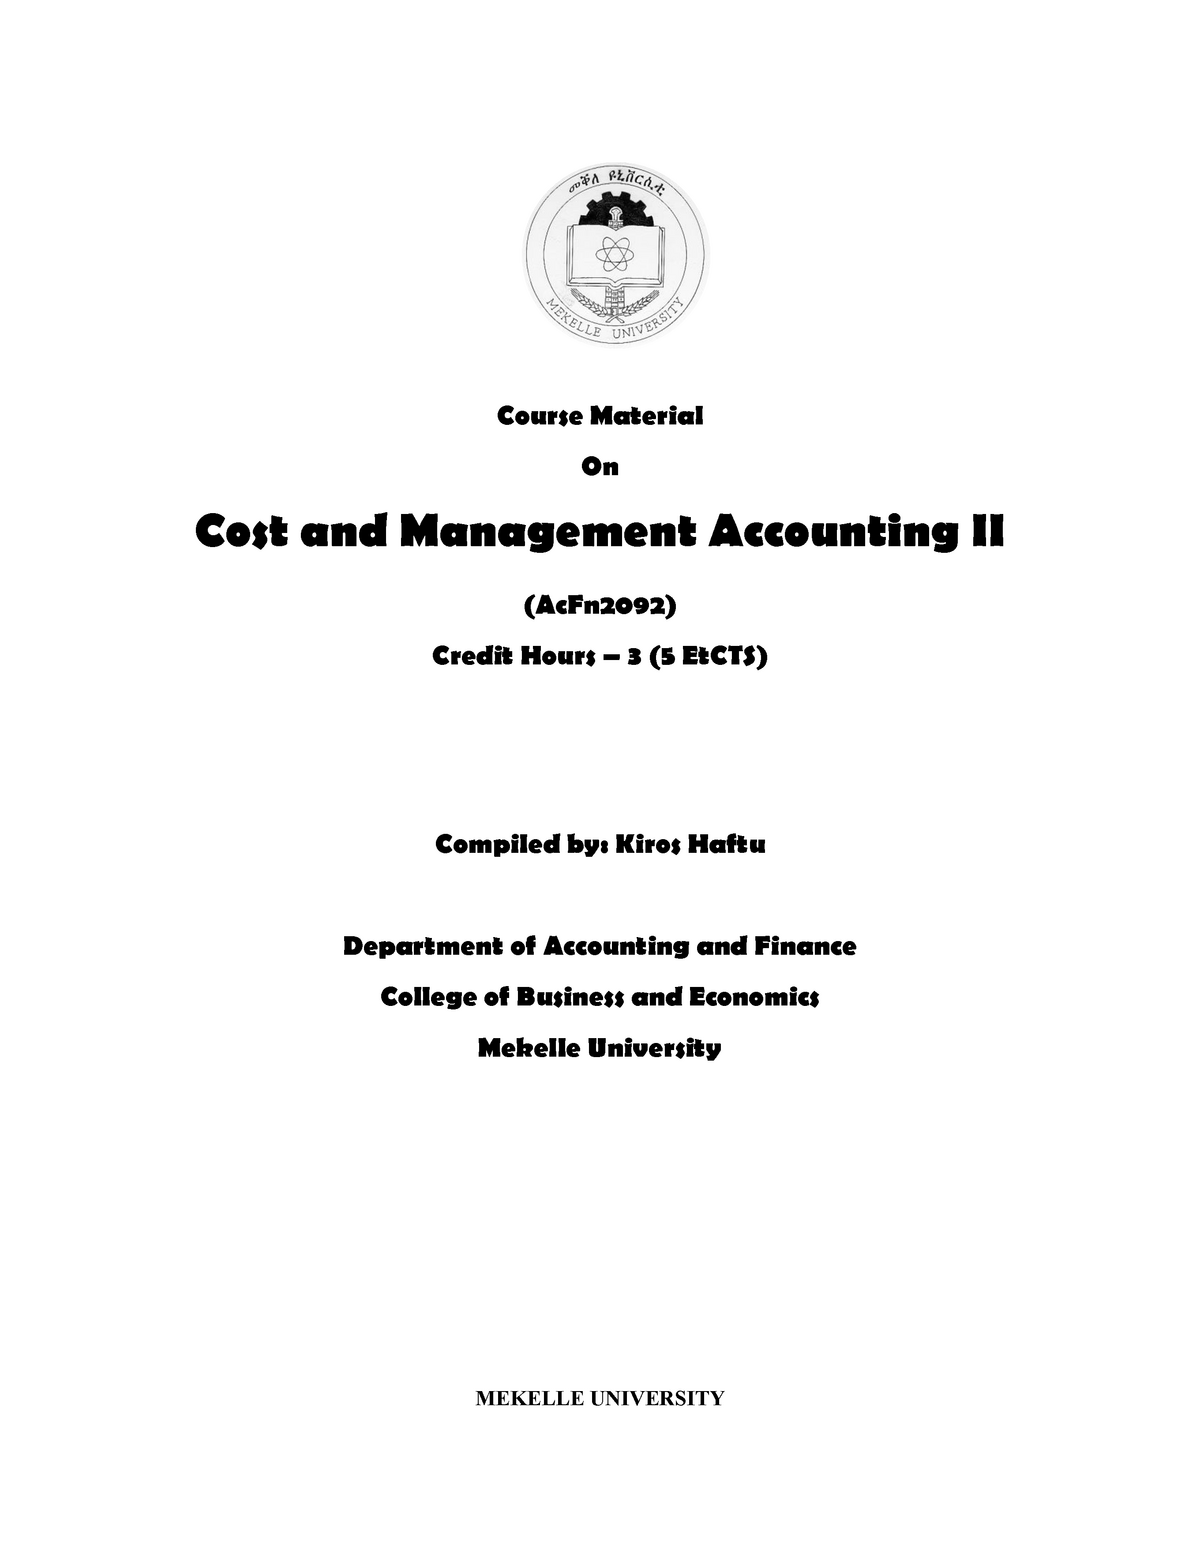 accounting thesis aau